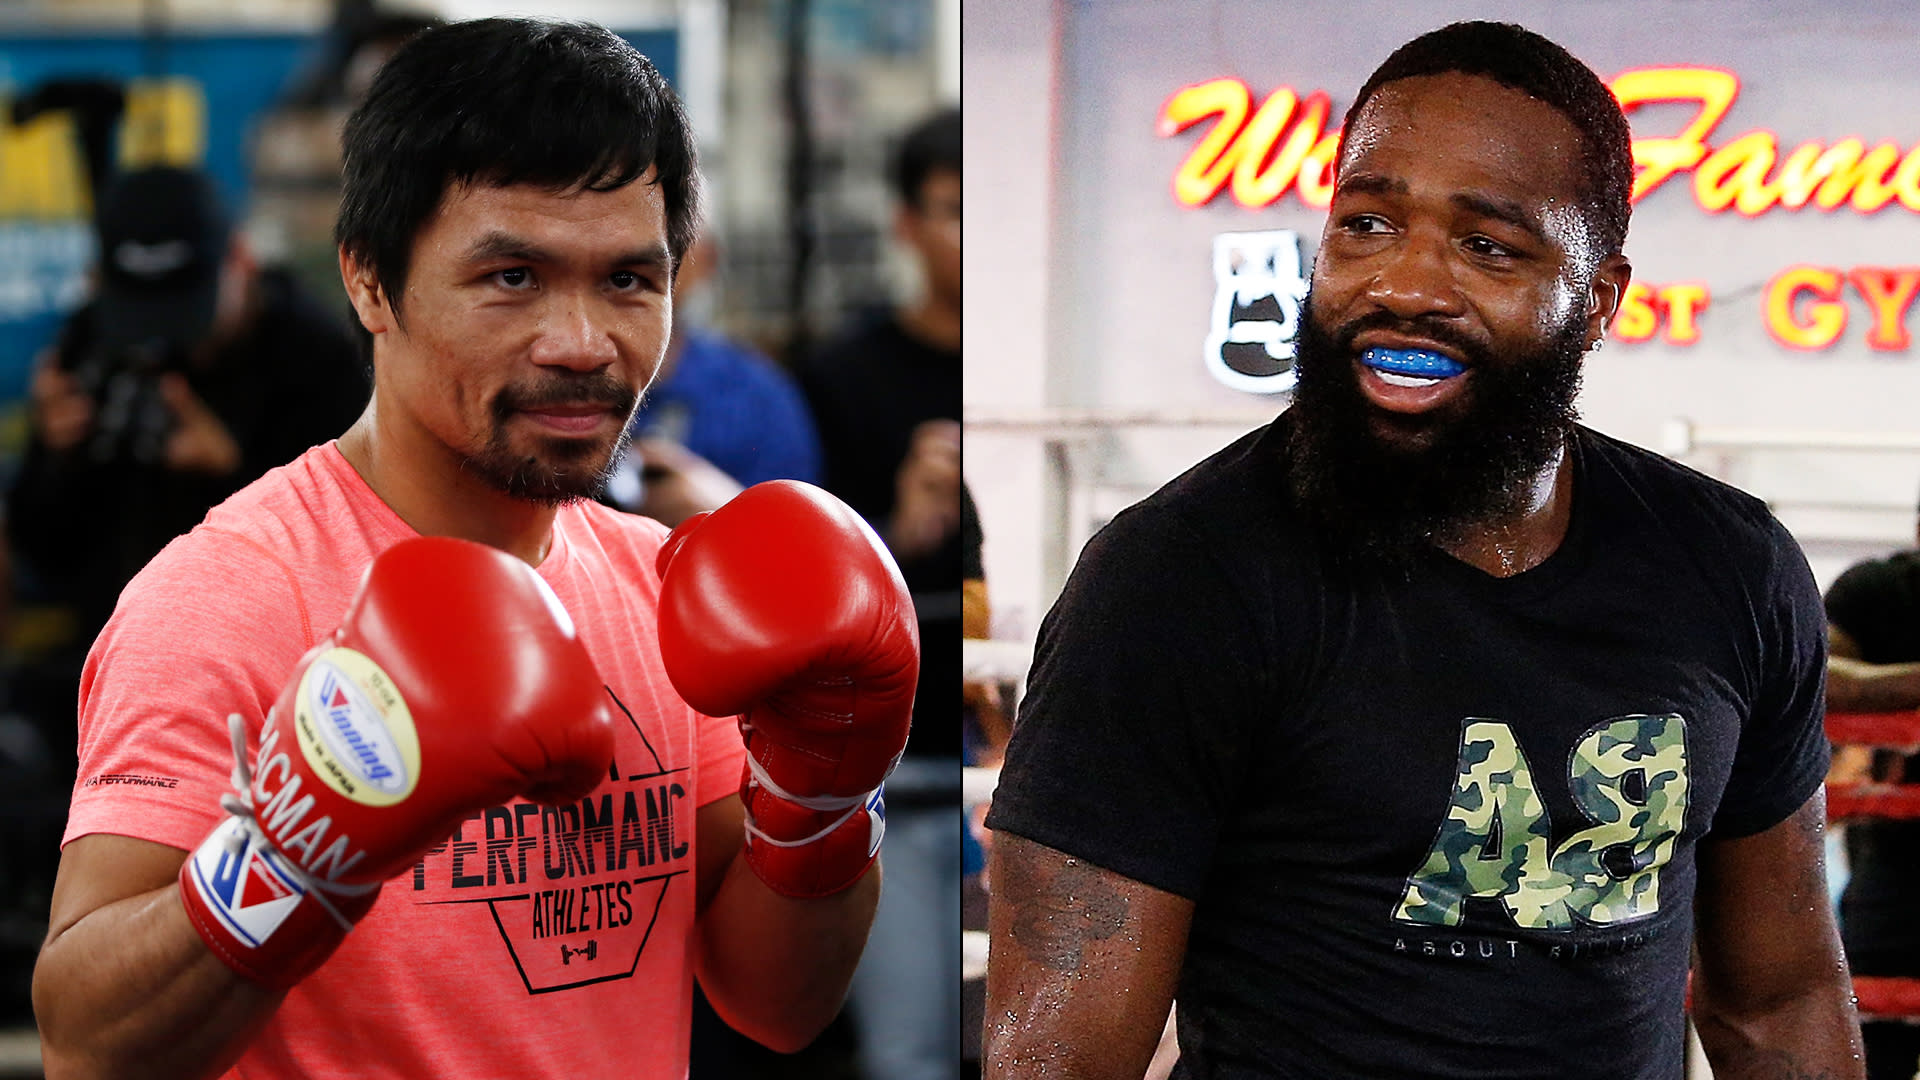 With Freddie Roach back in his corner, Manny Pacquiao displaying renewed boxing-first mentality picture